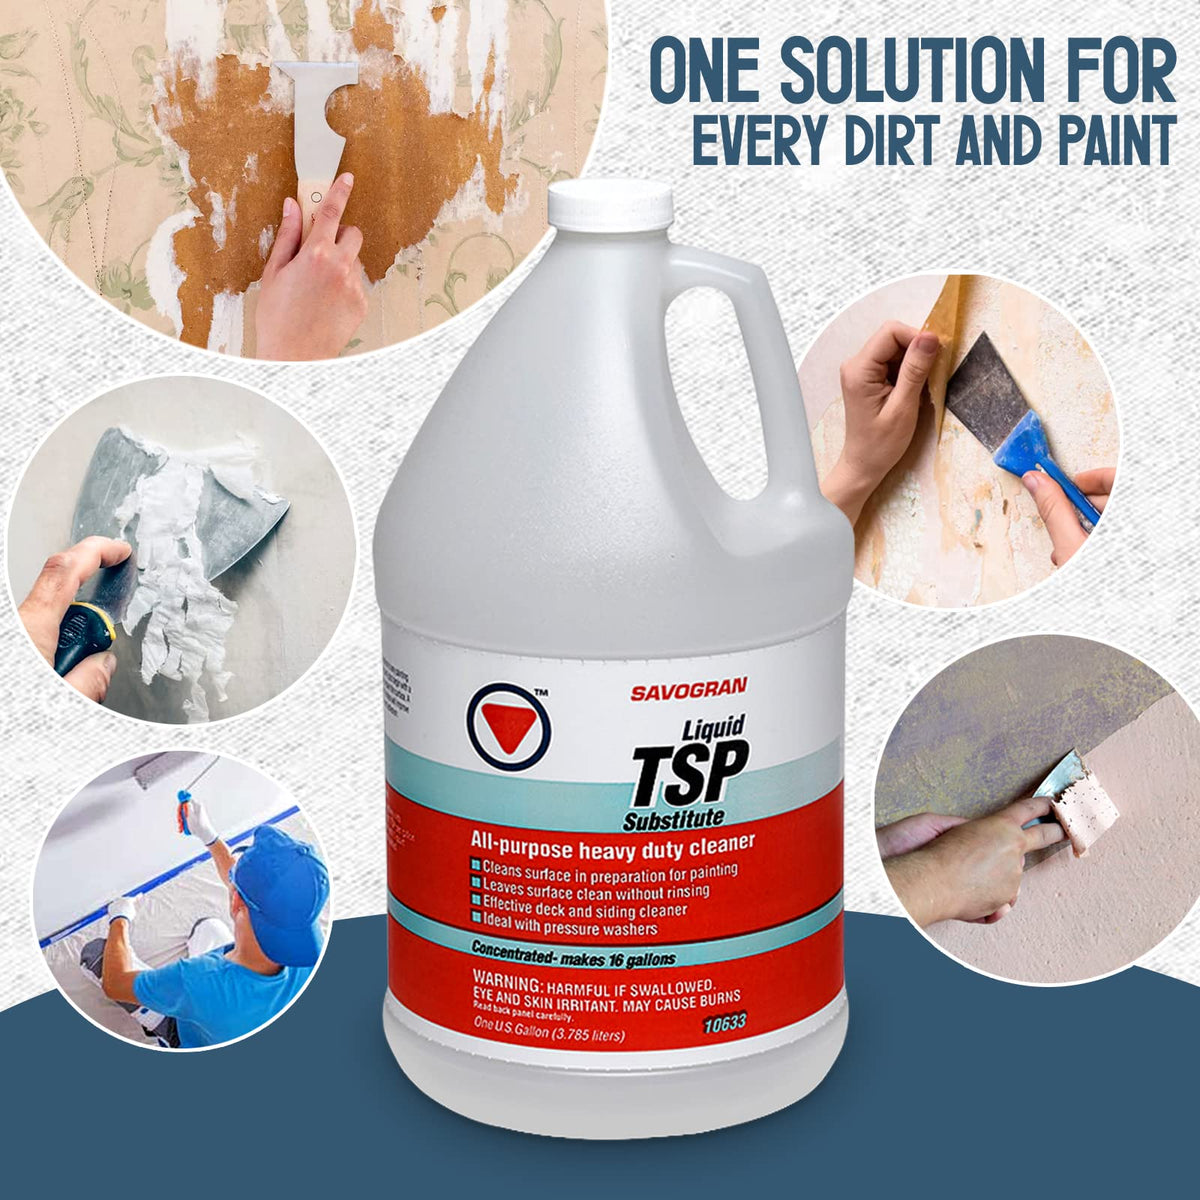 Centaurus AZ Klean Strip Liquid TSP Substitute- Wood Furniture Cleaner - Paint Cleaner - Deglosser for Kitchen Cabinets - Available with Premium